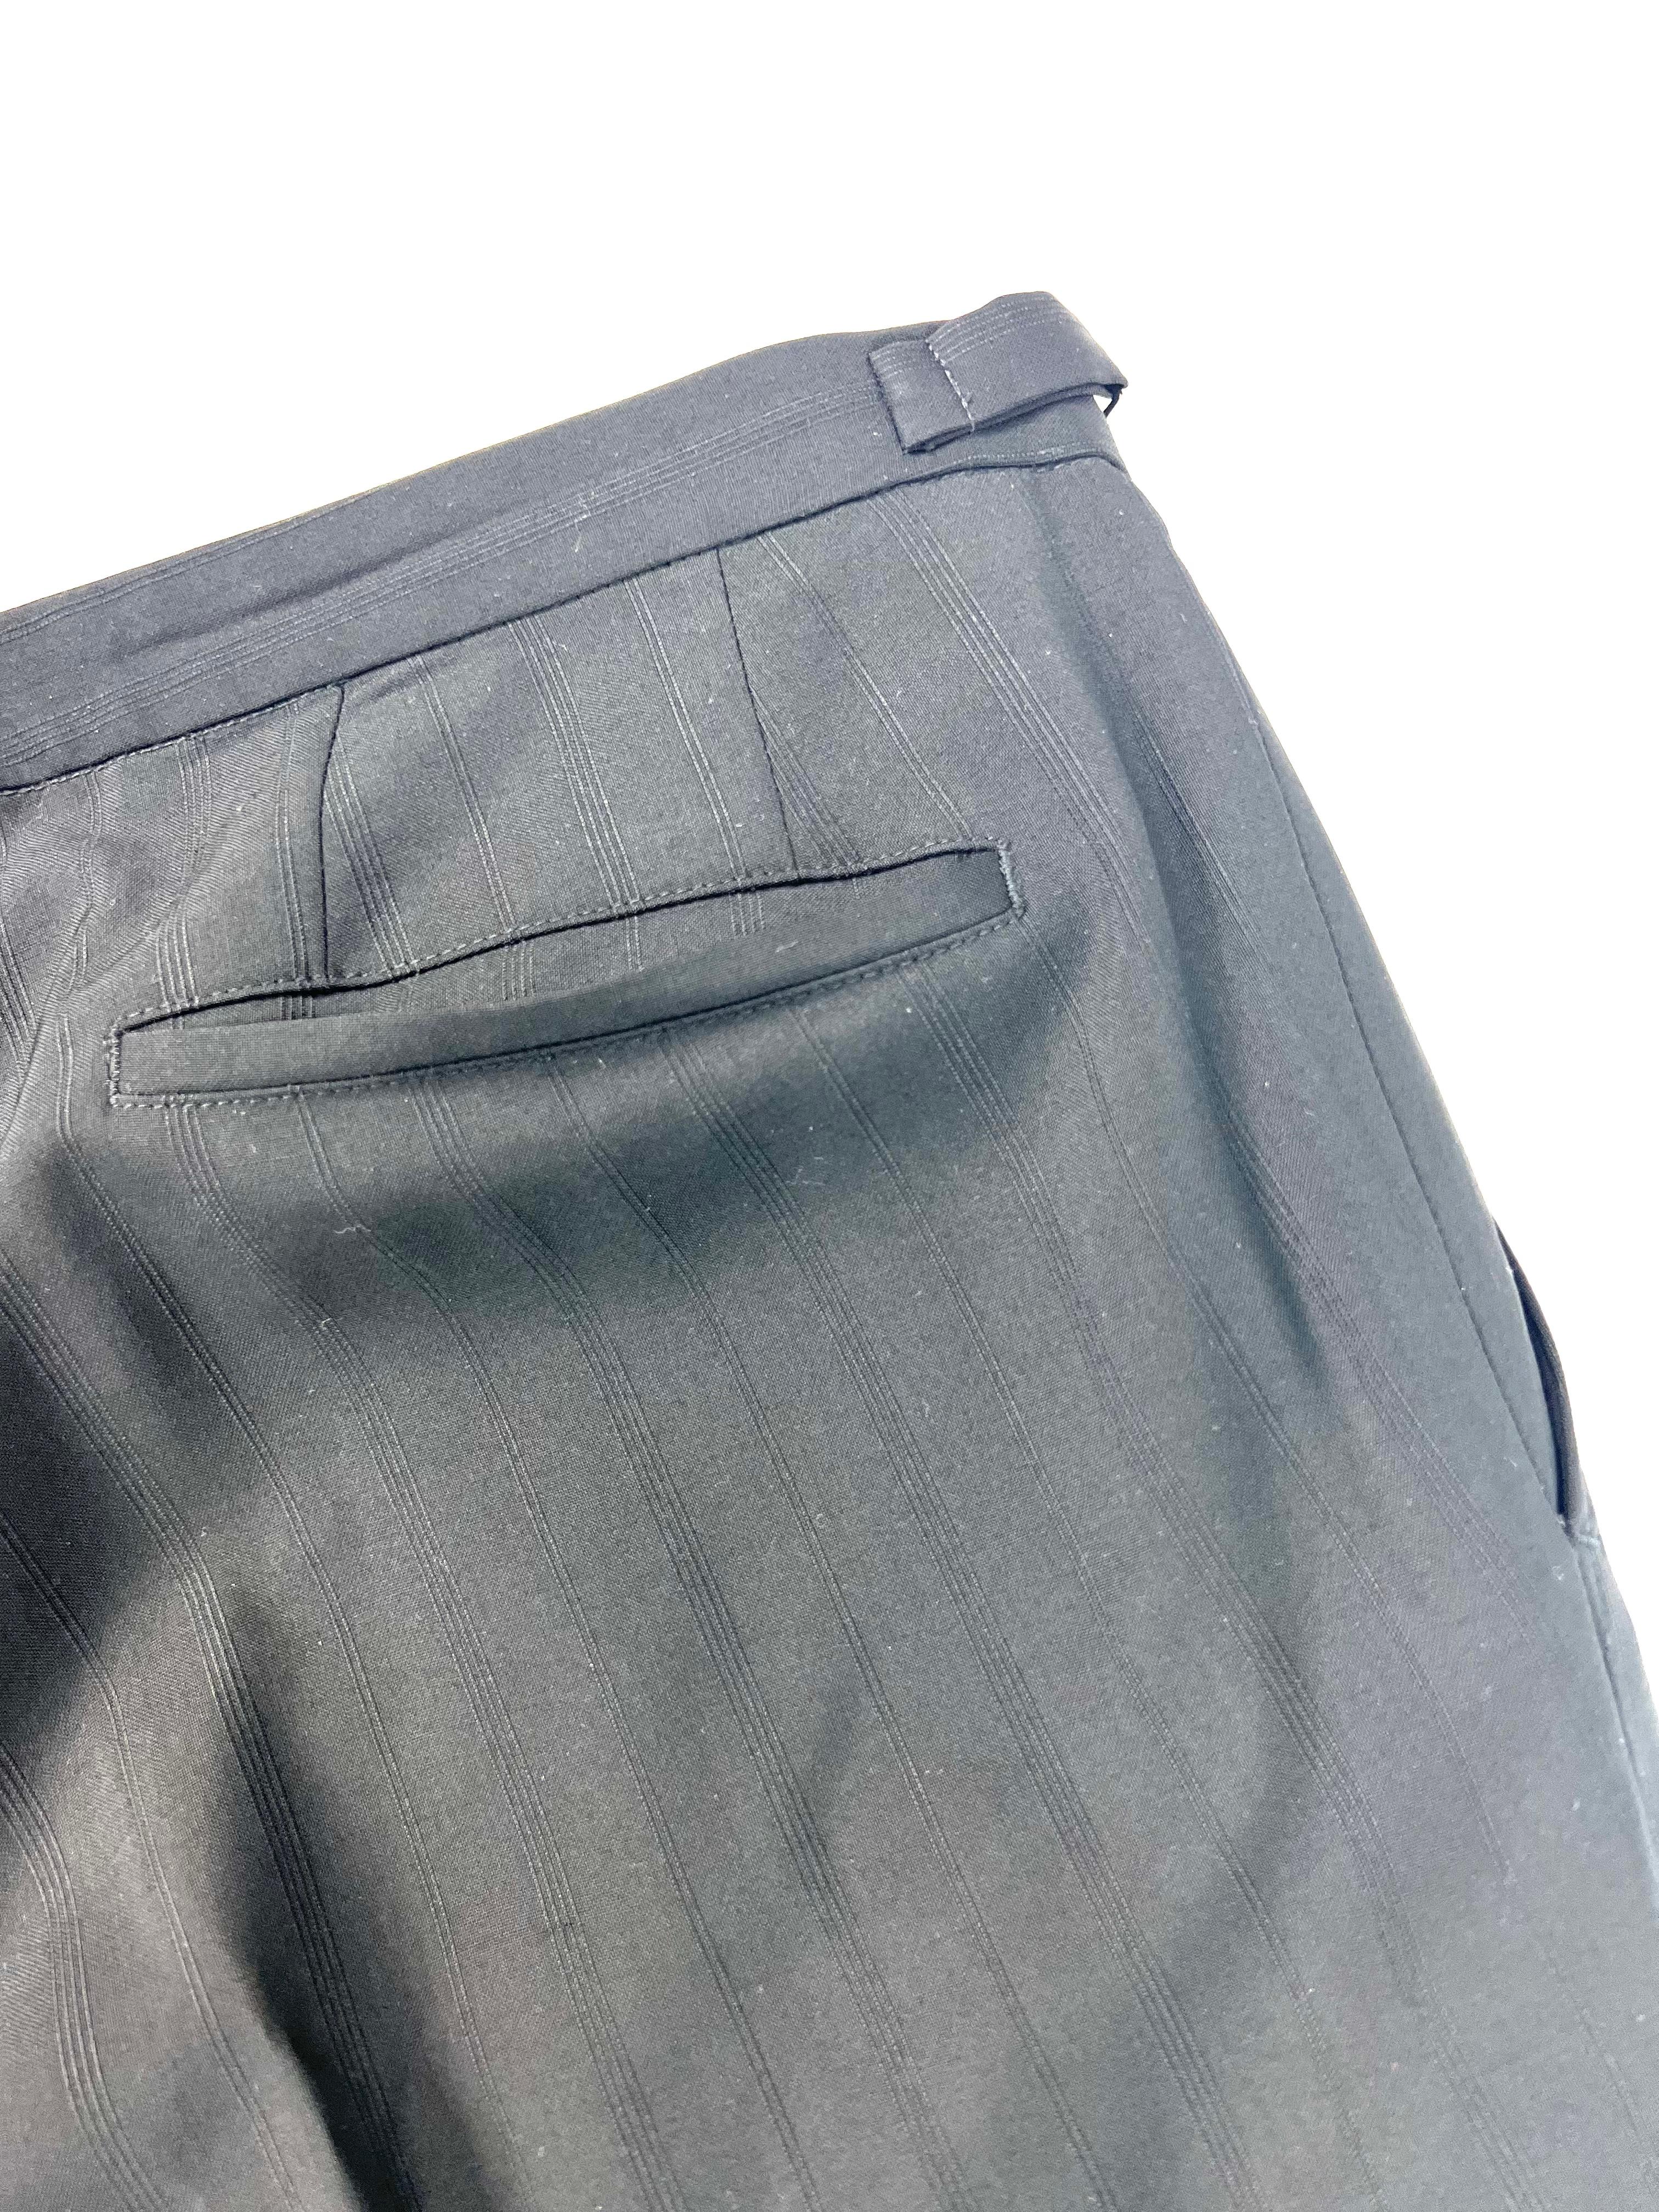 Hugo Boss Black Wool Trousers Pants, Size 38 In Good Condition For Sale In Beverly Hills, CA